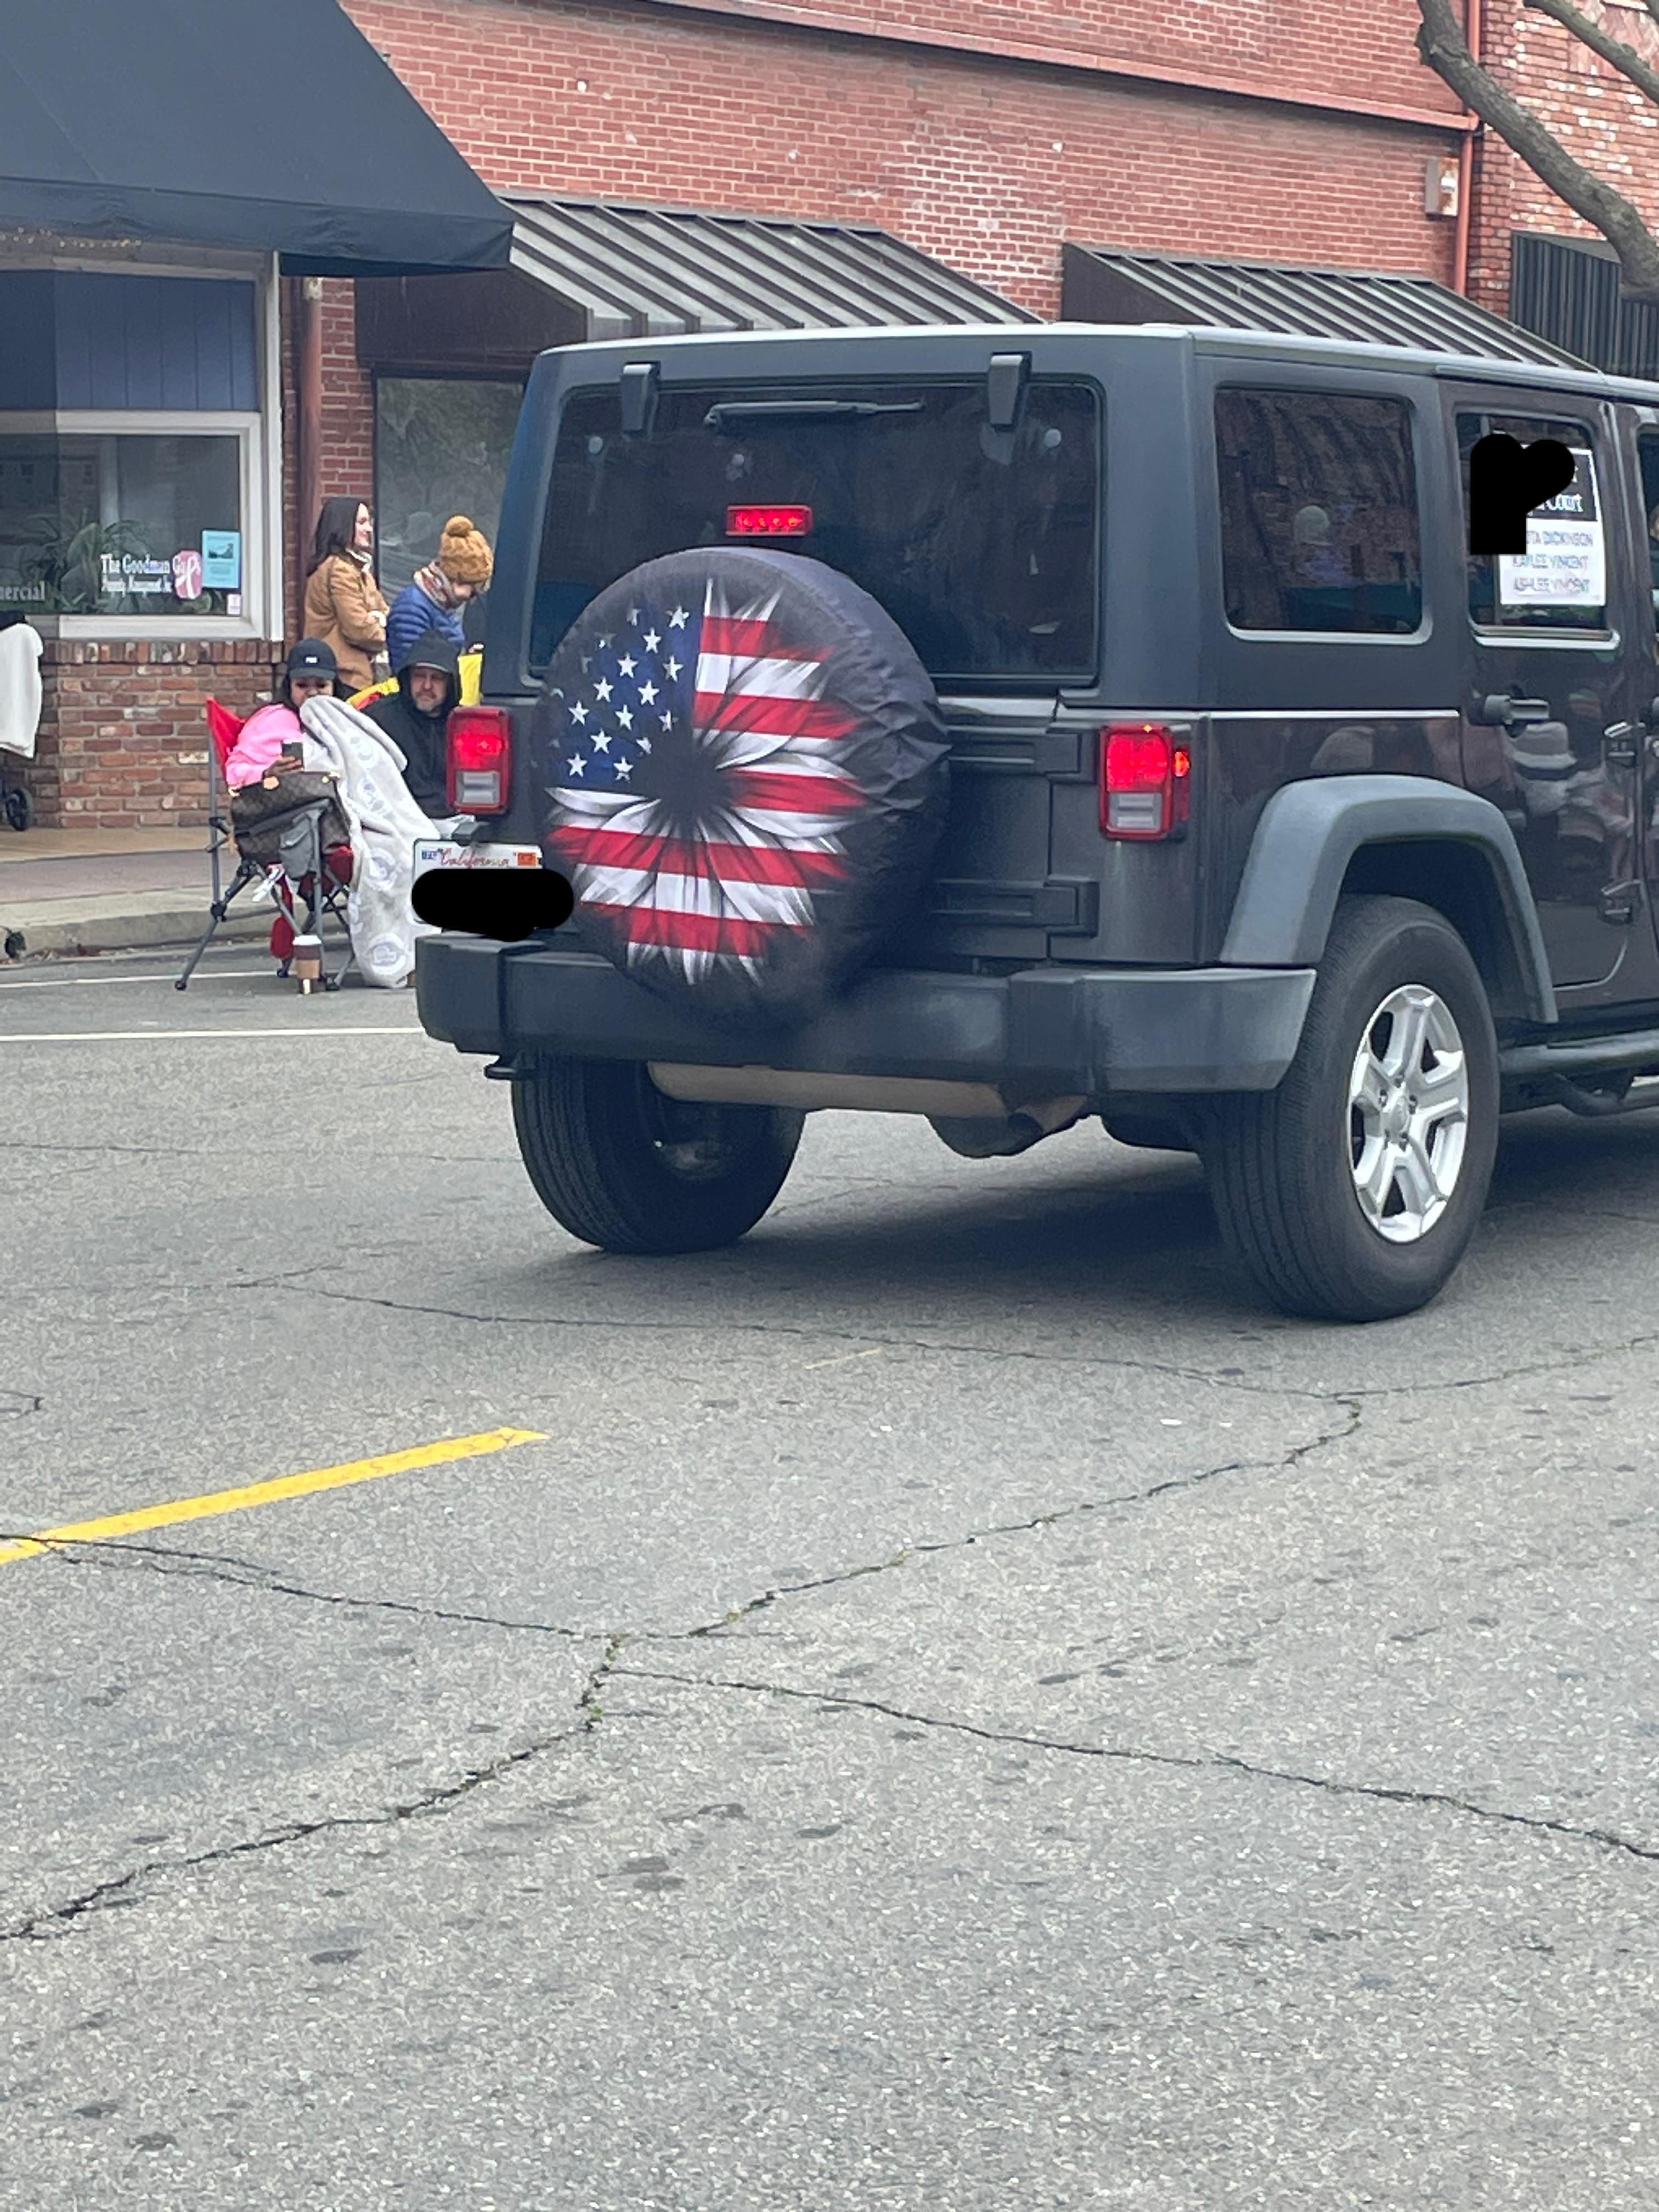 American flag butthole tire cover.